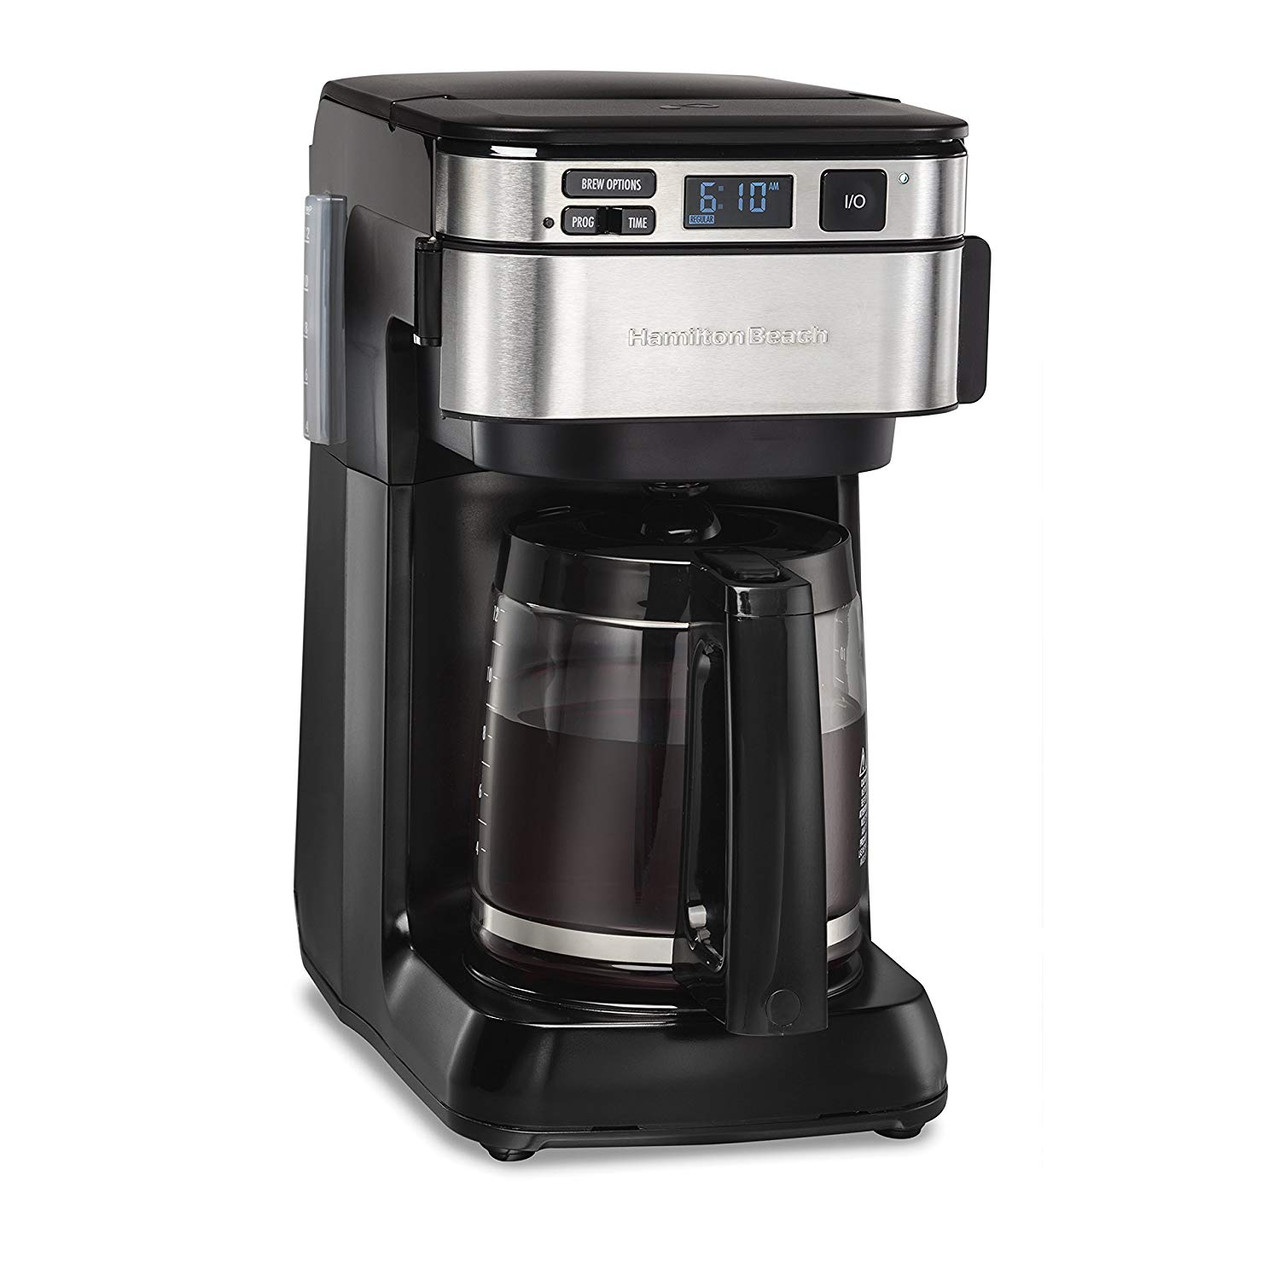 https://cdn10.bigcommerce.com/s-qjsa4ji/products/164/images/505/Hamilton_Beach_Programmable_Coffee_Maker_12_Cups_Front_Access_Easy_Fill_Pause_Serve_3_Brewing_Options_Black__91731.1574363140.1280.1280.jpg?c=2